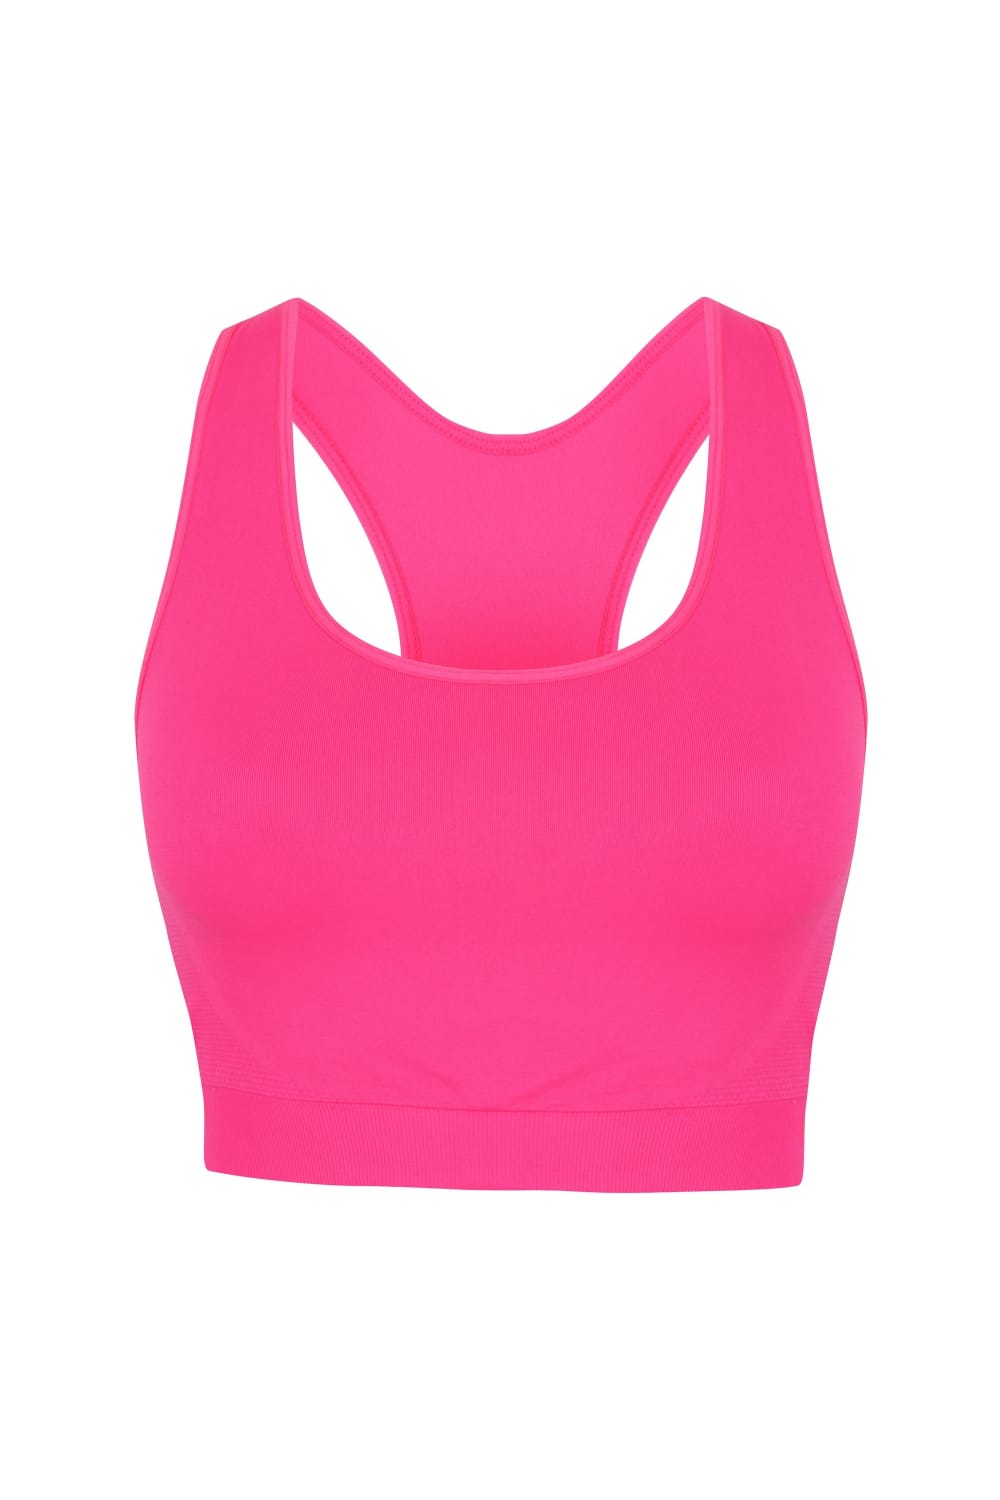 Skinni Fit Womens/Ladies Workout Cropped Top (Neon Pink)